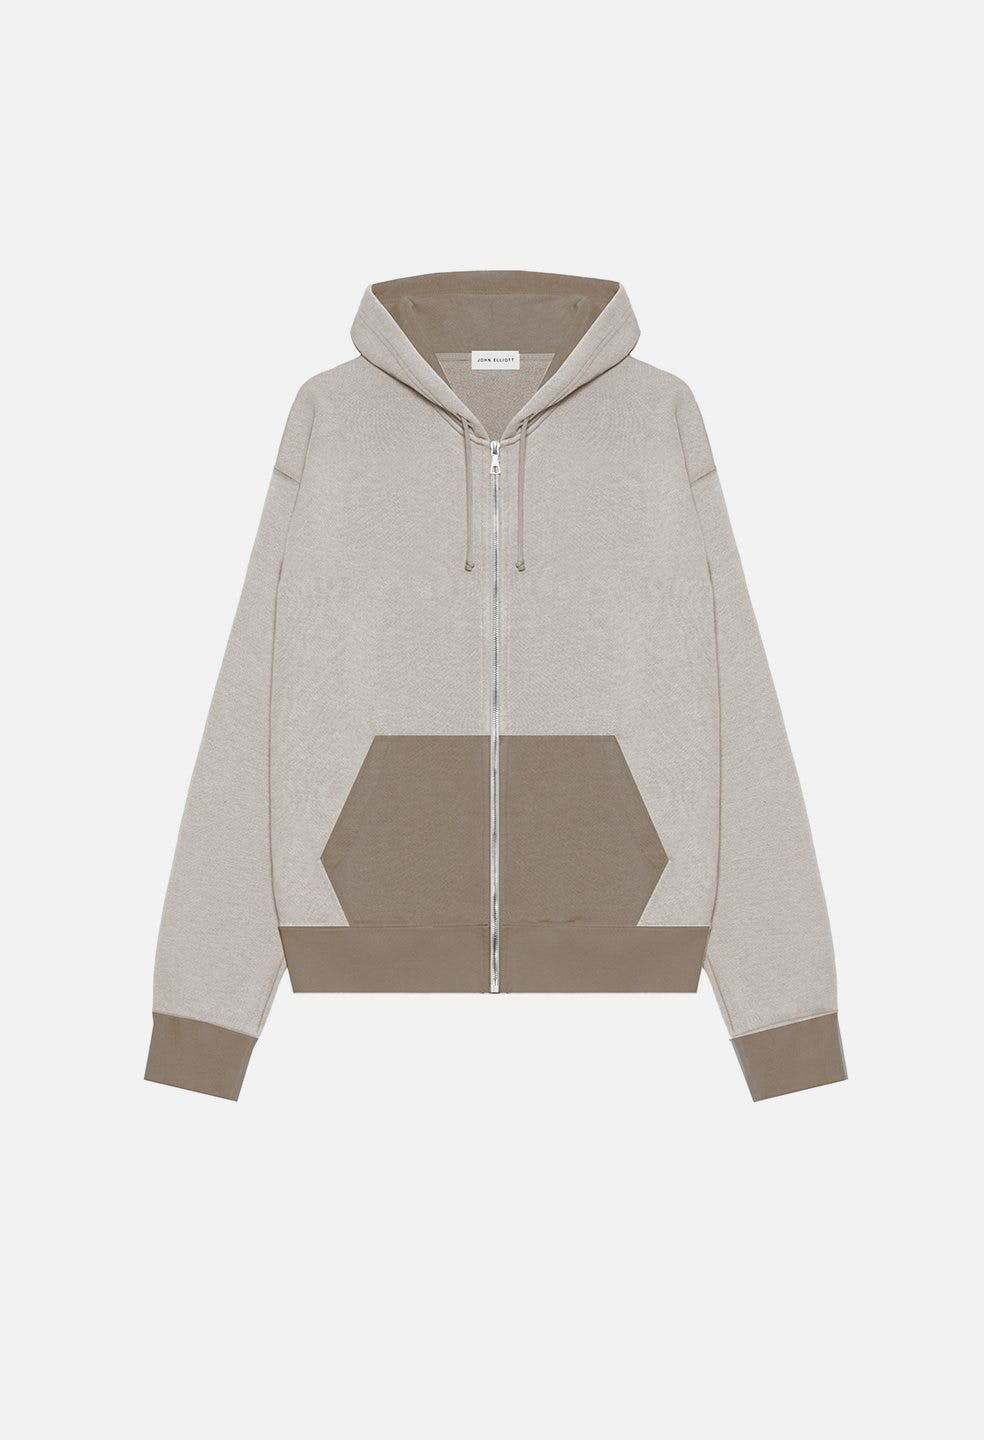 Kith Hooded Ginza French Clay 正規店販売 www.lepalace-gammarth.com